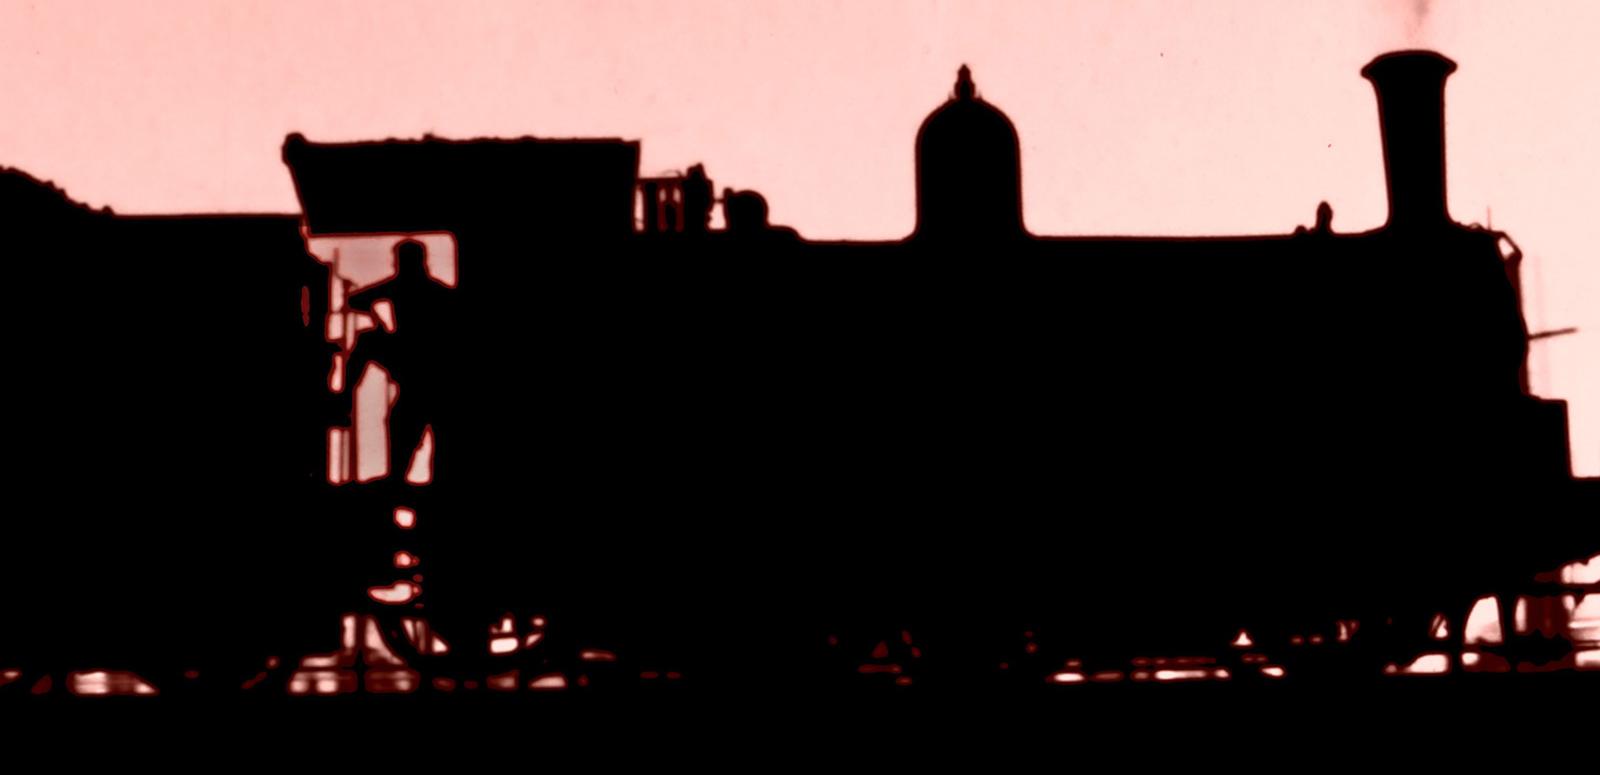 Silhouette of a steam train against a pink tinted background.